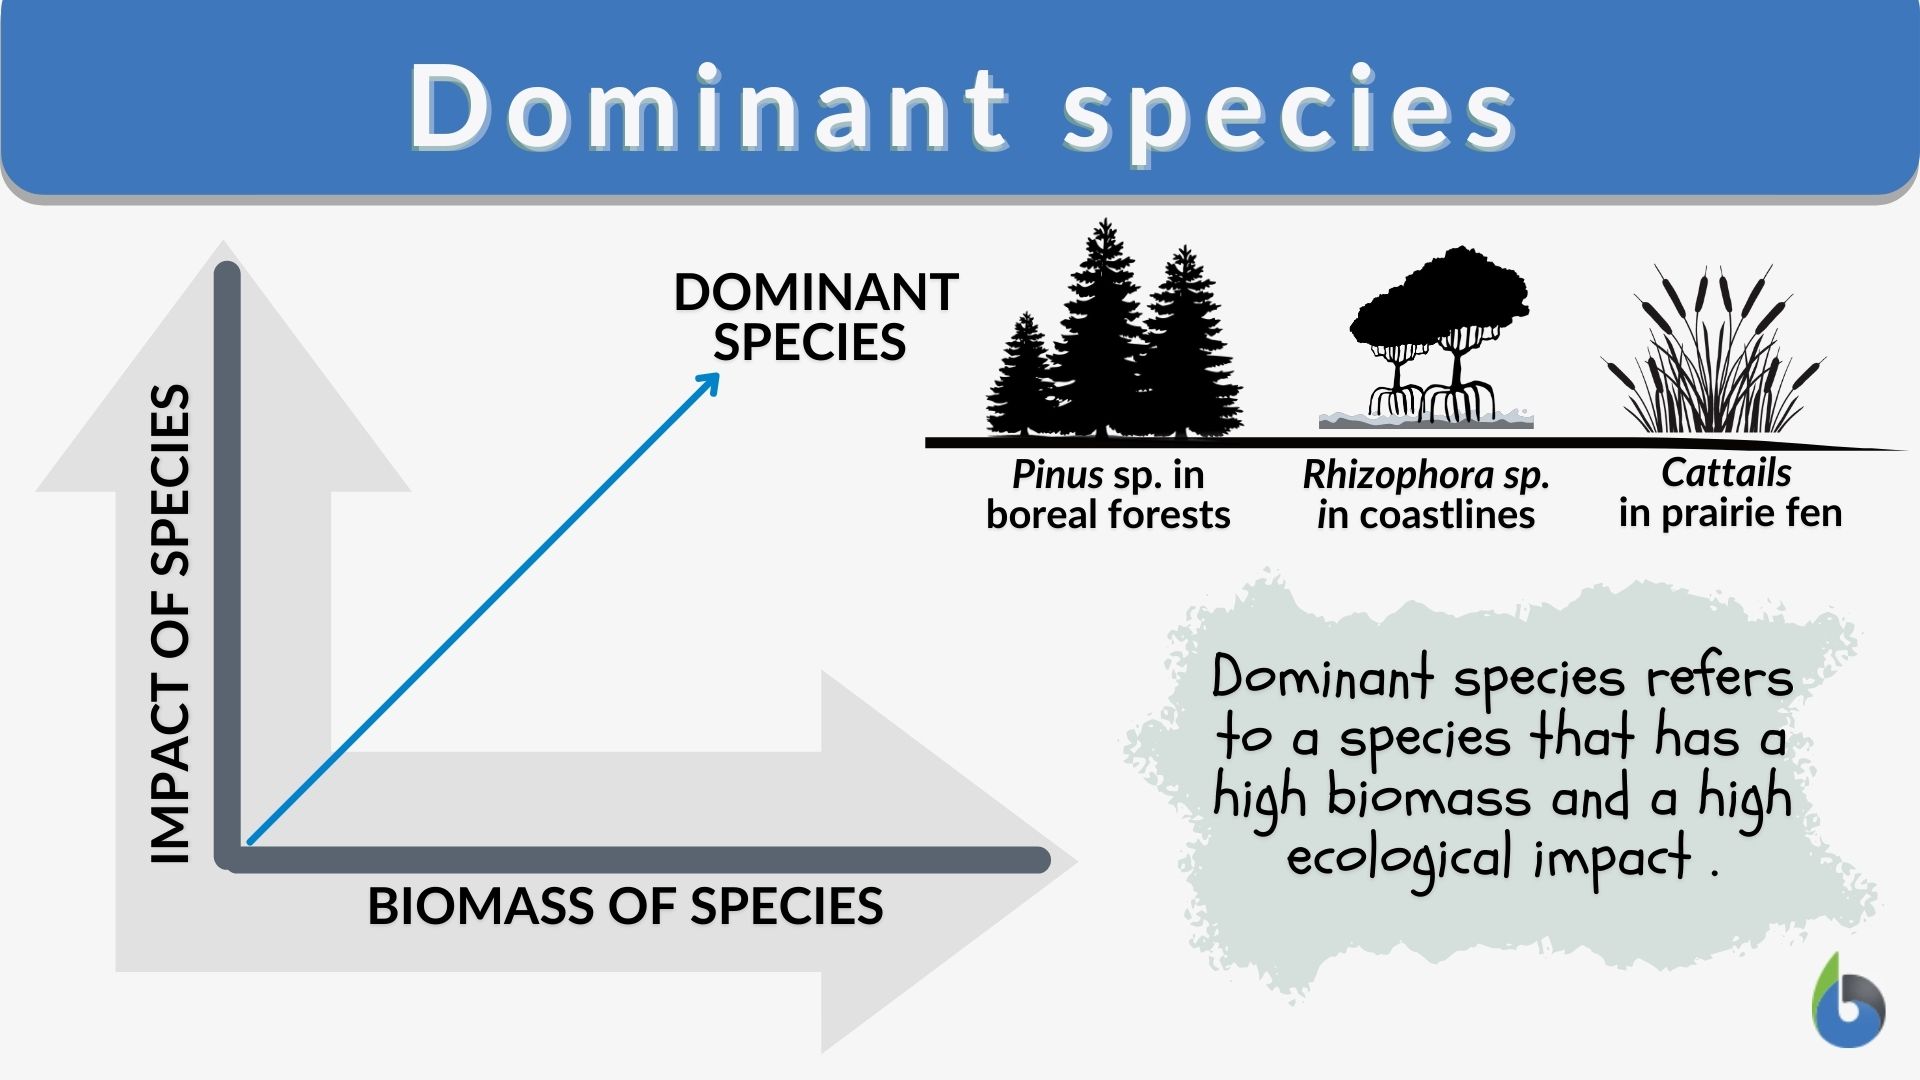 What is a keystone species? + Example